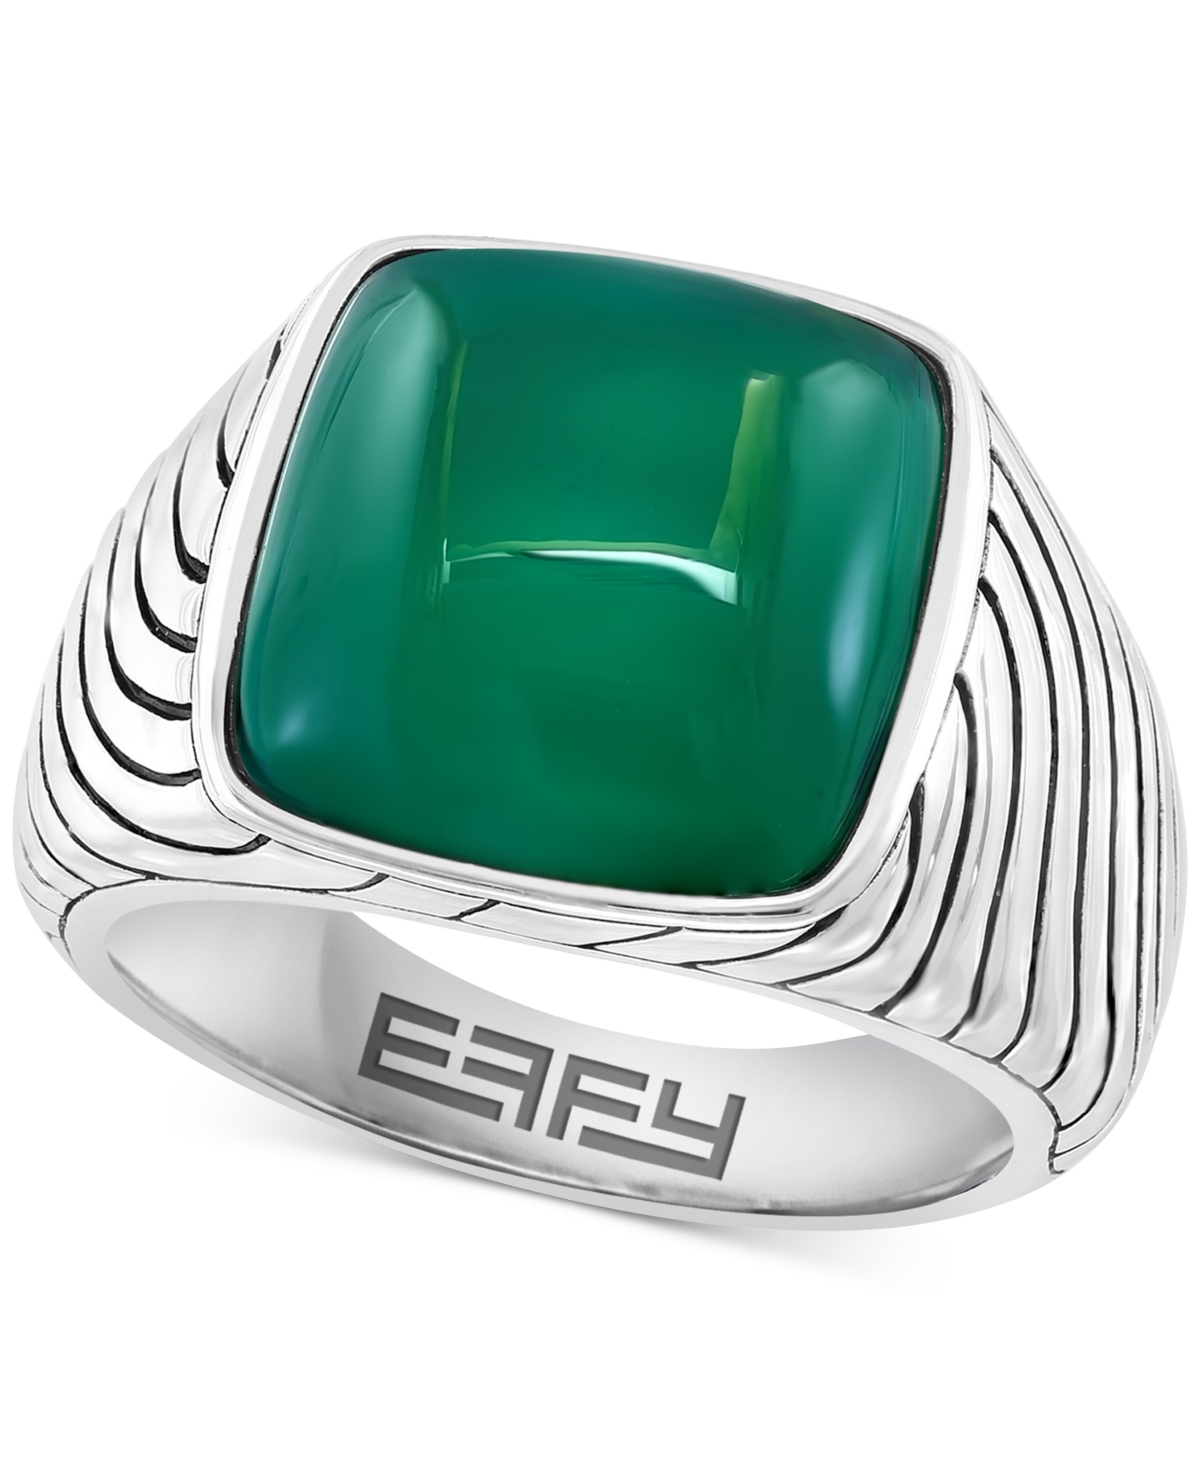 Effy Men's Green Chalcedony Textured Ring in Sterling Silver - Silver